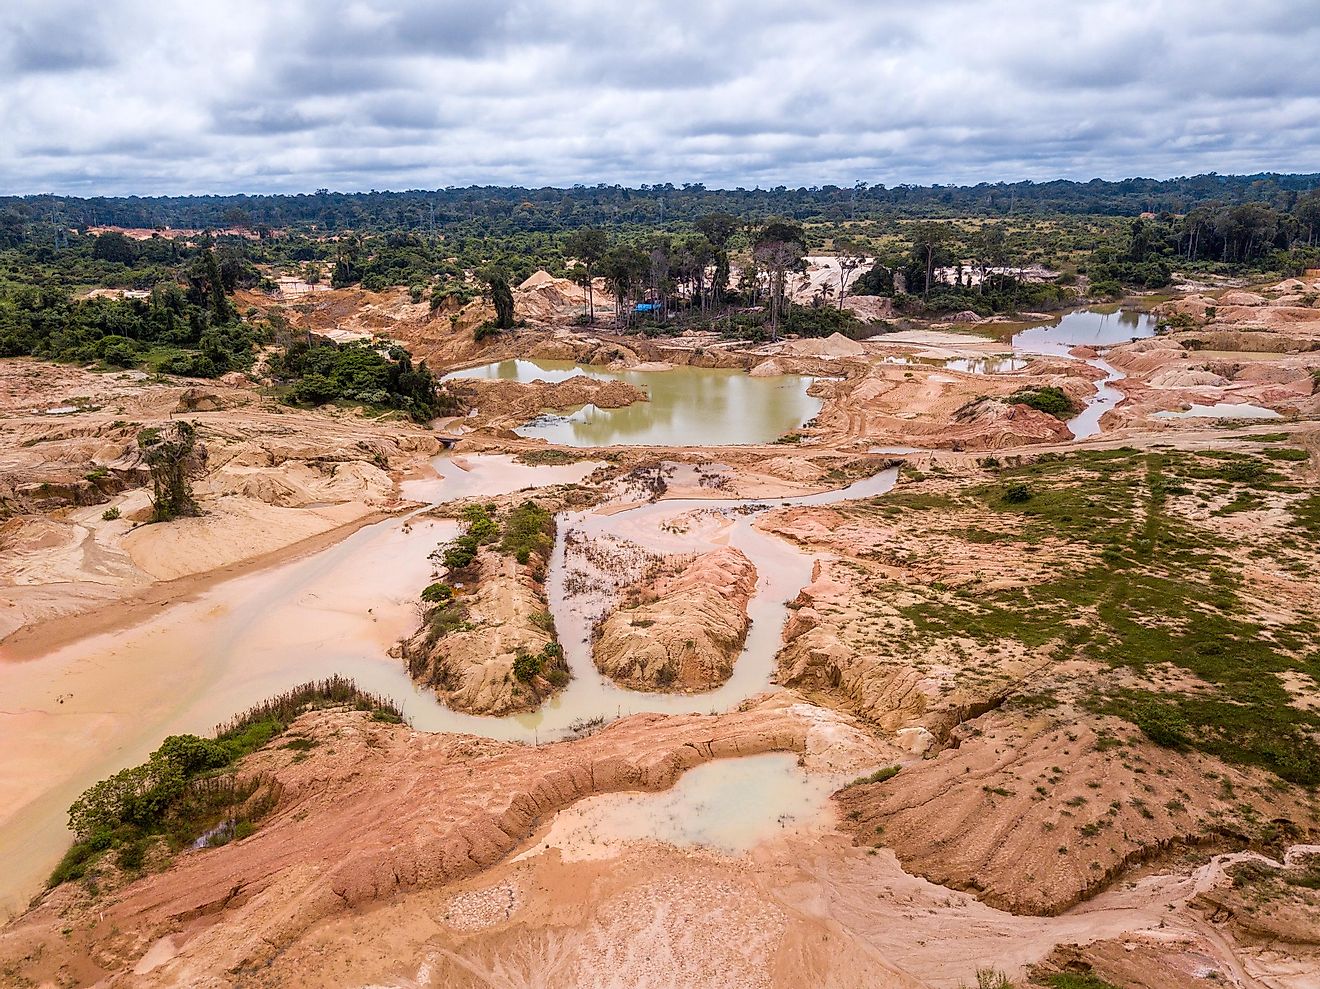 Many countries demand minerals and metals, which are often found below the surface of the rainforest.